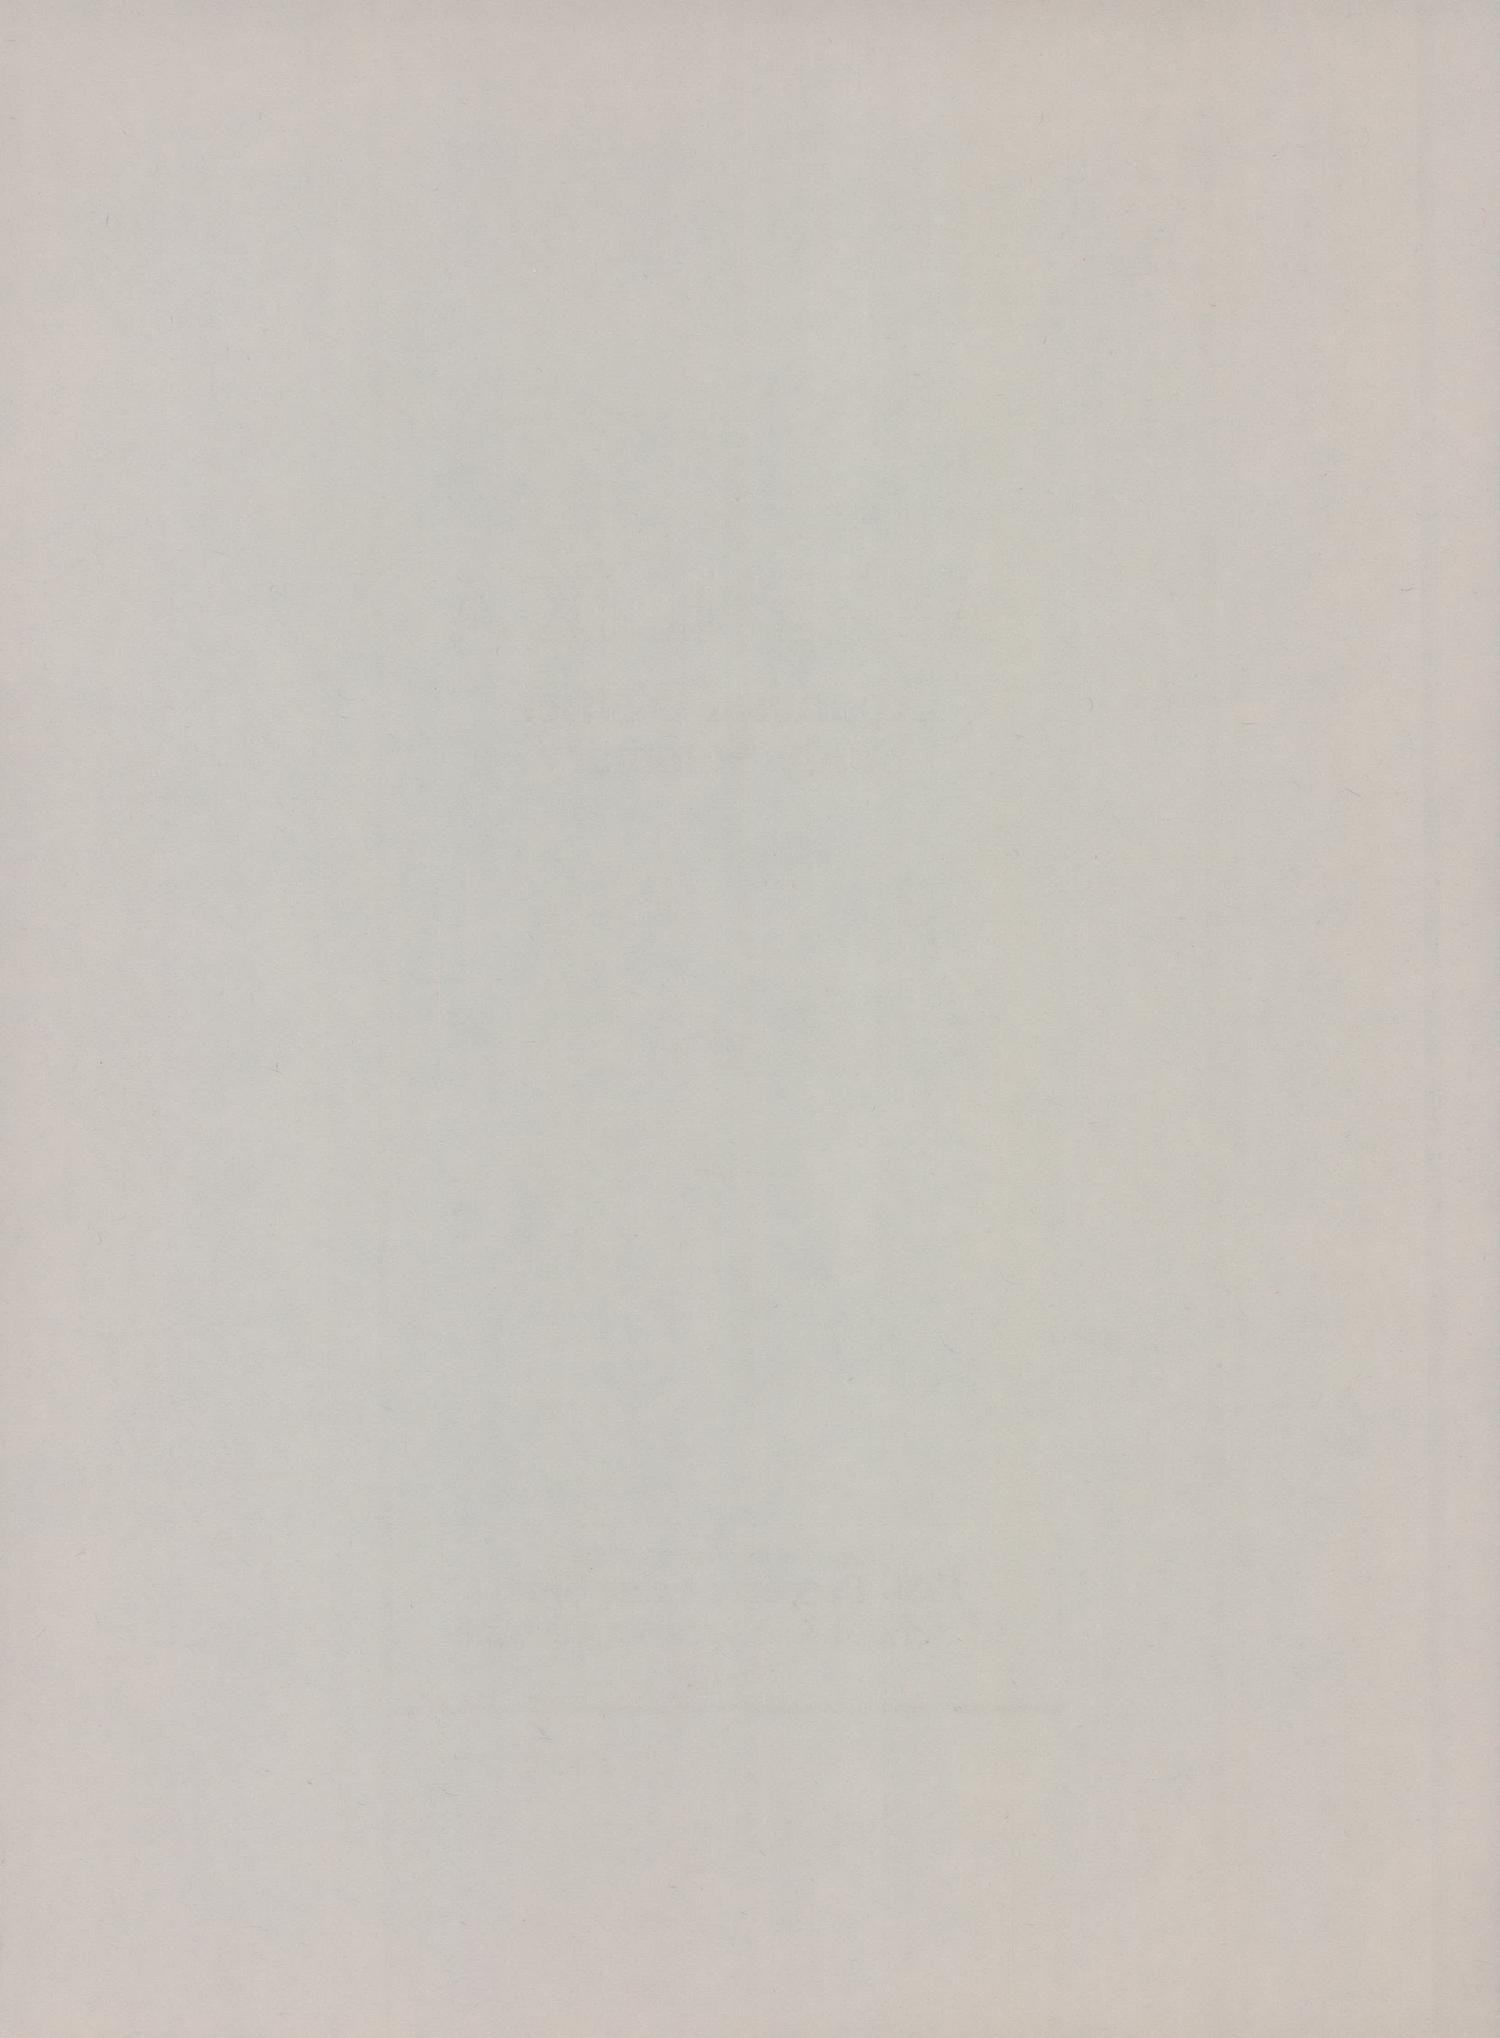 Texas School and Appraisal Districts' Property Value Study: Report of the Findings, 1986
                                                
                                                    BLANK
                                                